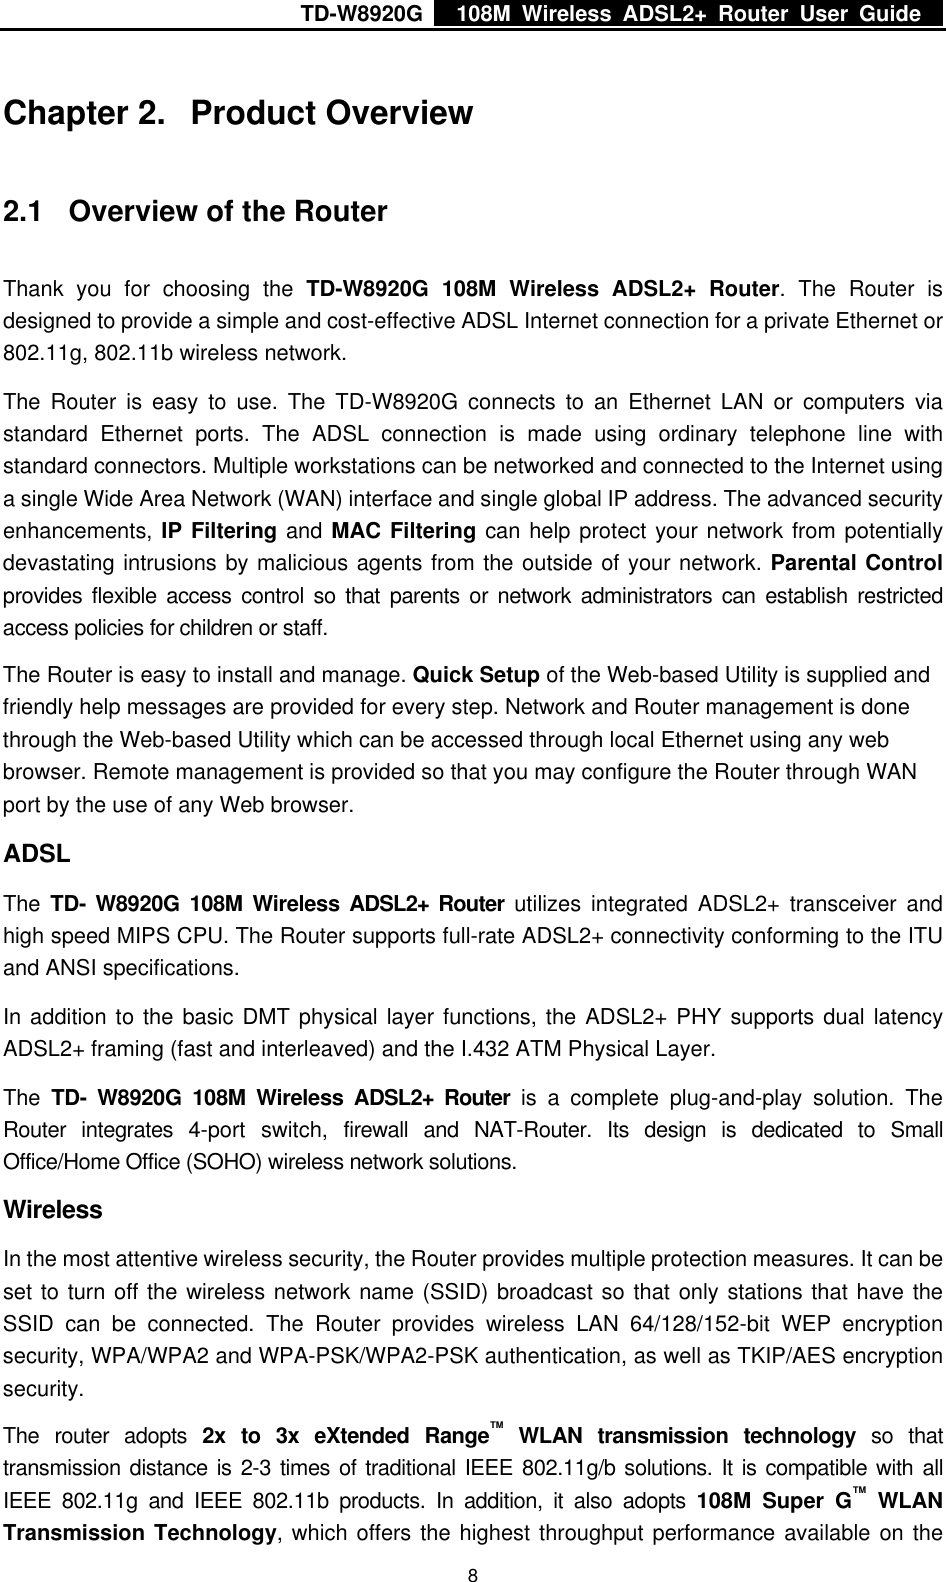 TD-W8920G    108M Wireless ADSL2+ Router User Guide    8 Chapter 2.  Product Overview 2.1  Overview of the Router Thank you for choosing the TD-W8920G 108M Wireless ADSL2+ Router. The Router is designed to provide a simple and cost-effective ADSL Internet connection for a private Ethernet or 802.11g, 802.11b wireless network. The Router is easy to use. The TD-W8920G connects to an Ethernet LAN or computers via standard Ethernet ports. The ADSL connection is made using ordinary telephone line with standard connectors. Multiple workstations can be networked and connected to the Internet using a single Wide Area Network (WAN) interface and single global IP address. The advanced security enhancements, IP Filtering and MAC Filtering can help protect your network from potentially devastating intrusions by malicious agents from the outside of your network. Parental Control provides flexible access control so that parents or network administrators can establish restricted access policies for children or staff. The Router is easy to install and manage. Quick Setup of the Web-based Utility is supplied and friendly help messages are provided for every step. Network and Router management is done through the Web-based Utility which can be accessed through local Ethernet using any web browser. Remote management is provided so that you may configure the Router through WAN port by the use of any Web browser. ADSL The  TD- W8920G 108M Wireless ADSL2+ Router utilizes integrated ADSL2+ transceiver and high speed MIPS CPU. The Router supports full-rate ADSL2+ connectivity conforming to the ITU and ANSI specifications. In addition to the basic DMT physical layer functions, the ADSL2+ PHY supports dual latency ADSL2+ framing (fast and interleaved) and the I.432 ATM Physical Layer.   The  TD- W8920G 108M Wireless ADSL2+ Router is a complete plug-and-play solution. The Router integrates 4-port switch, firewall and NAT-Router. Its design is dedicated to Small Office/Home Office (SOHO) wireless network solutions.   Wireless In the most attentive wireless security, the Router provides multiple protection measures. It can be set to turn off the wireless network name (SSID) broadcast so that only stations that have the SSID can be connected. The Router provides wireless LAN 64/128/152-bit WEP encryption security, WPA/WPA2 and WPA-PSK/WPA2-PSK authentication, as well as TKIP/AES encryption security. The router adopts 2x to 3x eXtended Range™ WLAN transmission technology so that transmission distance is 2-3 times of traditional IEEE 802.11g/b solutions. It is compatible with all IEEE 802.11g and IEEE 802.11b products. In addition, it also adopts 108M Super G™ WLAN Transmission Technology, which offers the highest throughput performance available on the 